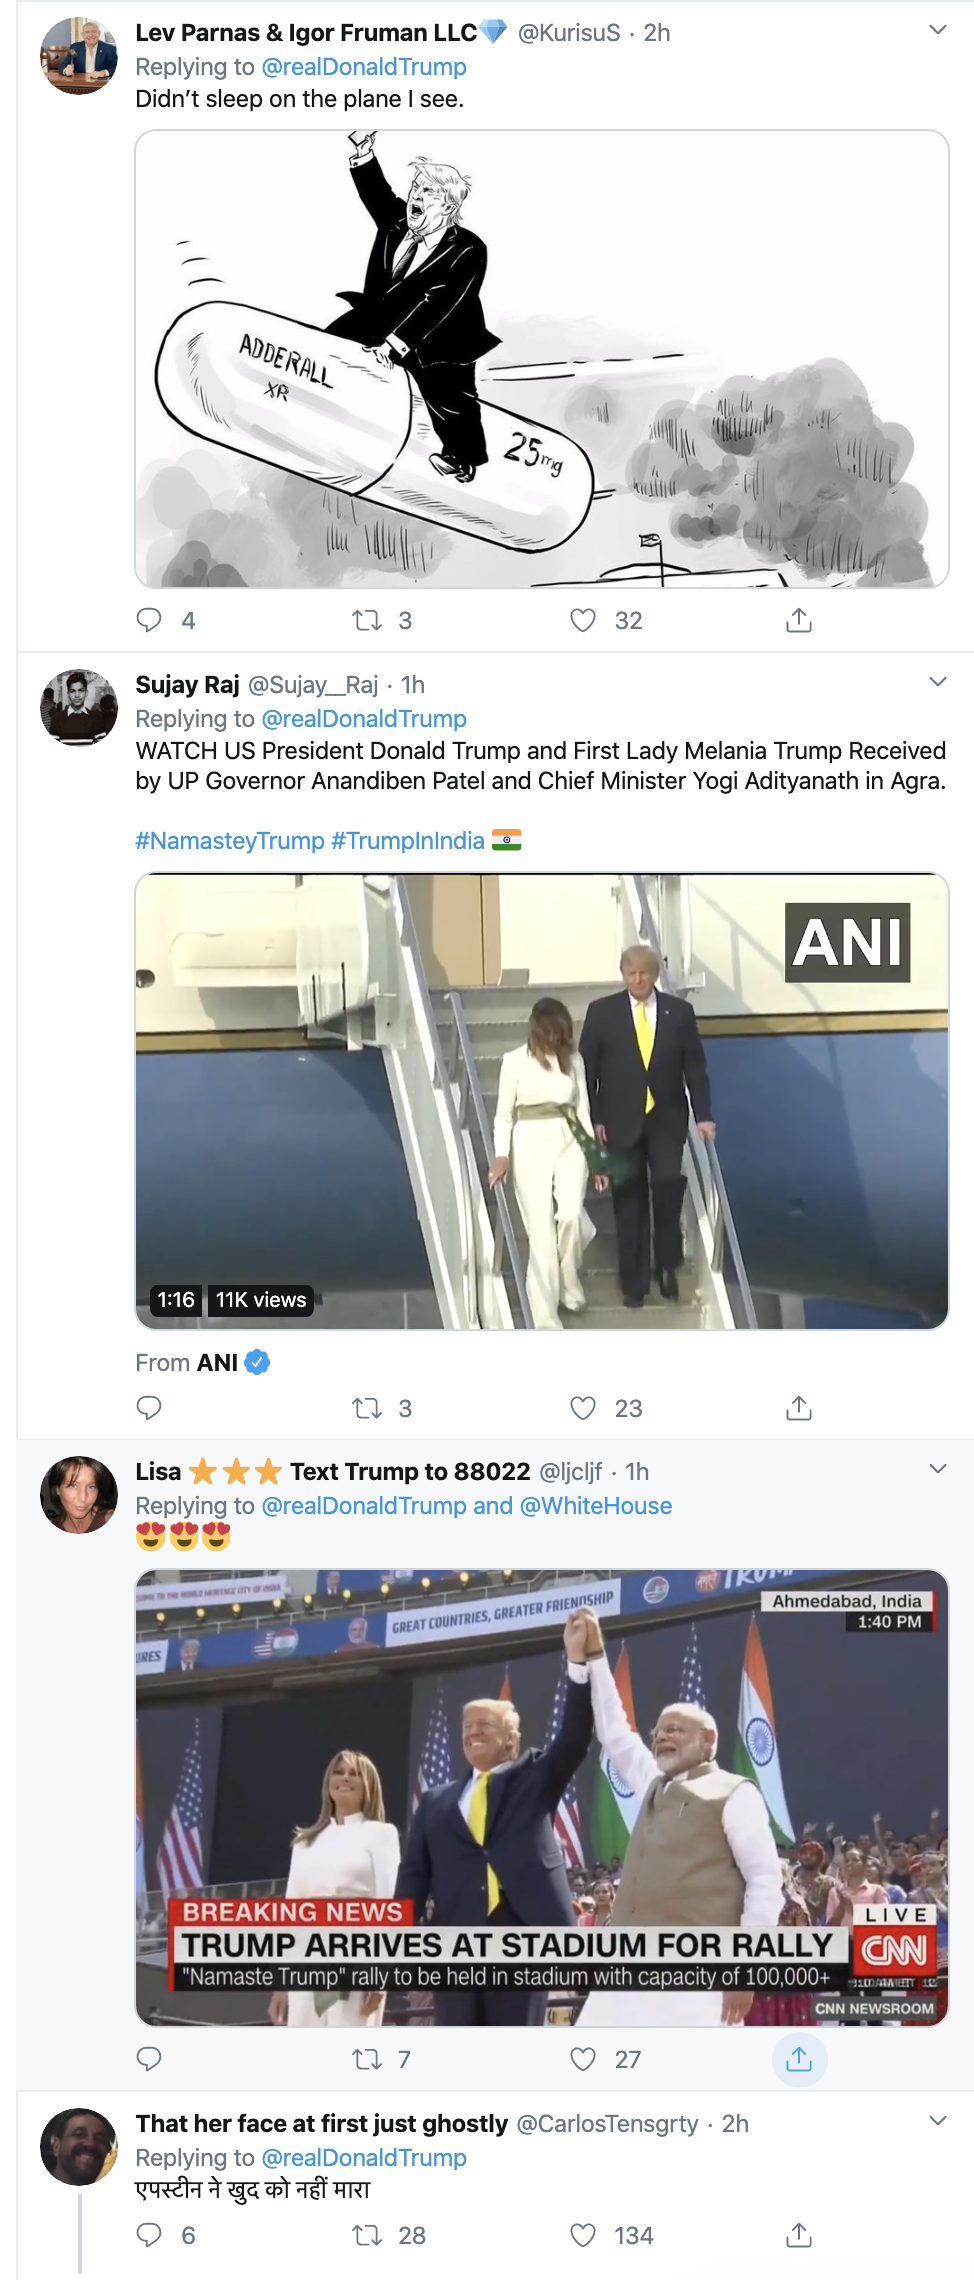 Screen-Shot-2020-02-24-at-7.19.41-AM Trump Tweets Arrival In India & Gets Mocked Online Donald Trump Featured Foreign Policy Politics Top Stories 